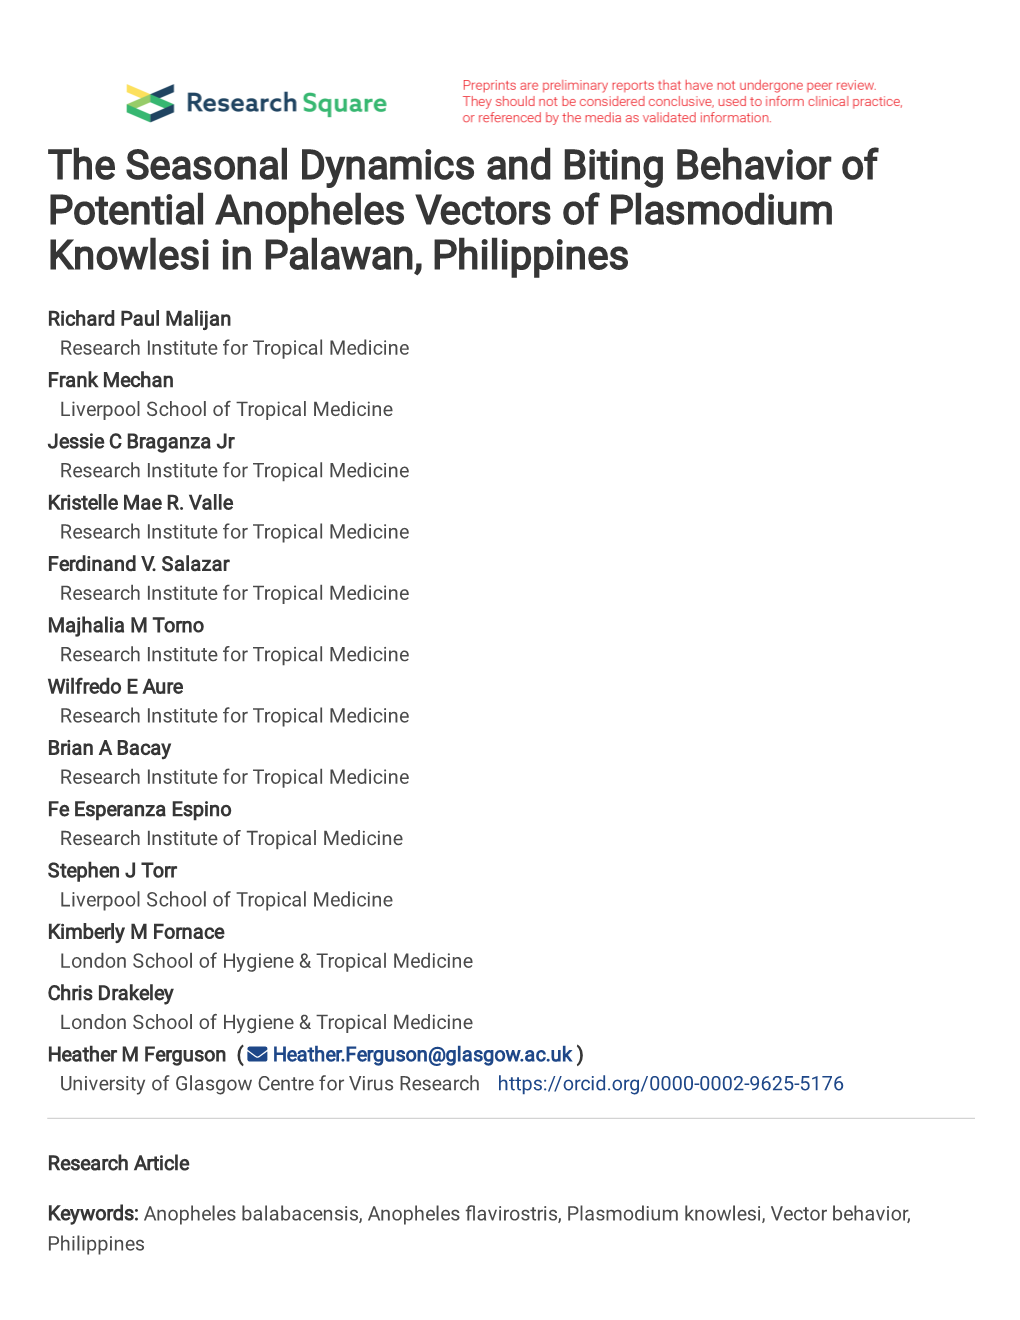 The Seasonal Dynamics and Biting Behavior of Potential Anopheles Vectors of Plasmodium Knowlesi in Palawan, Philippines